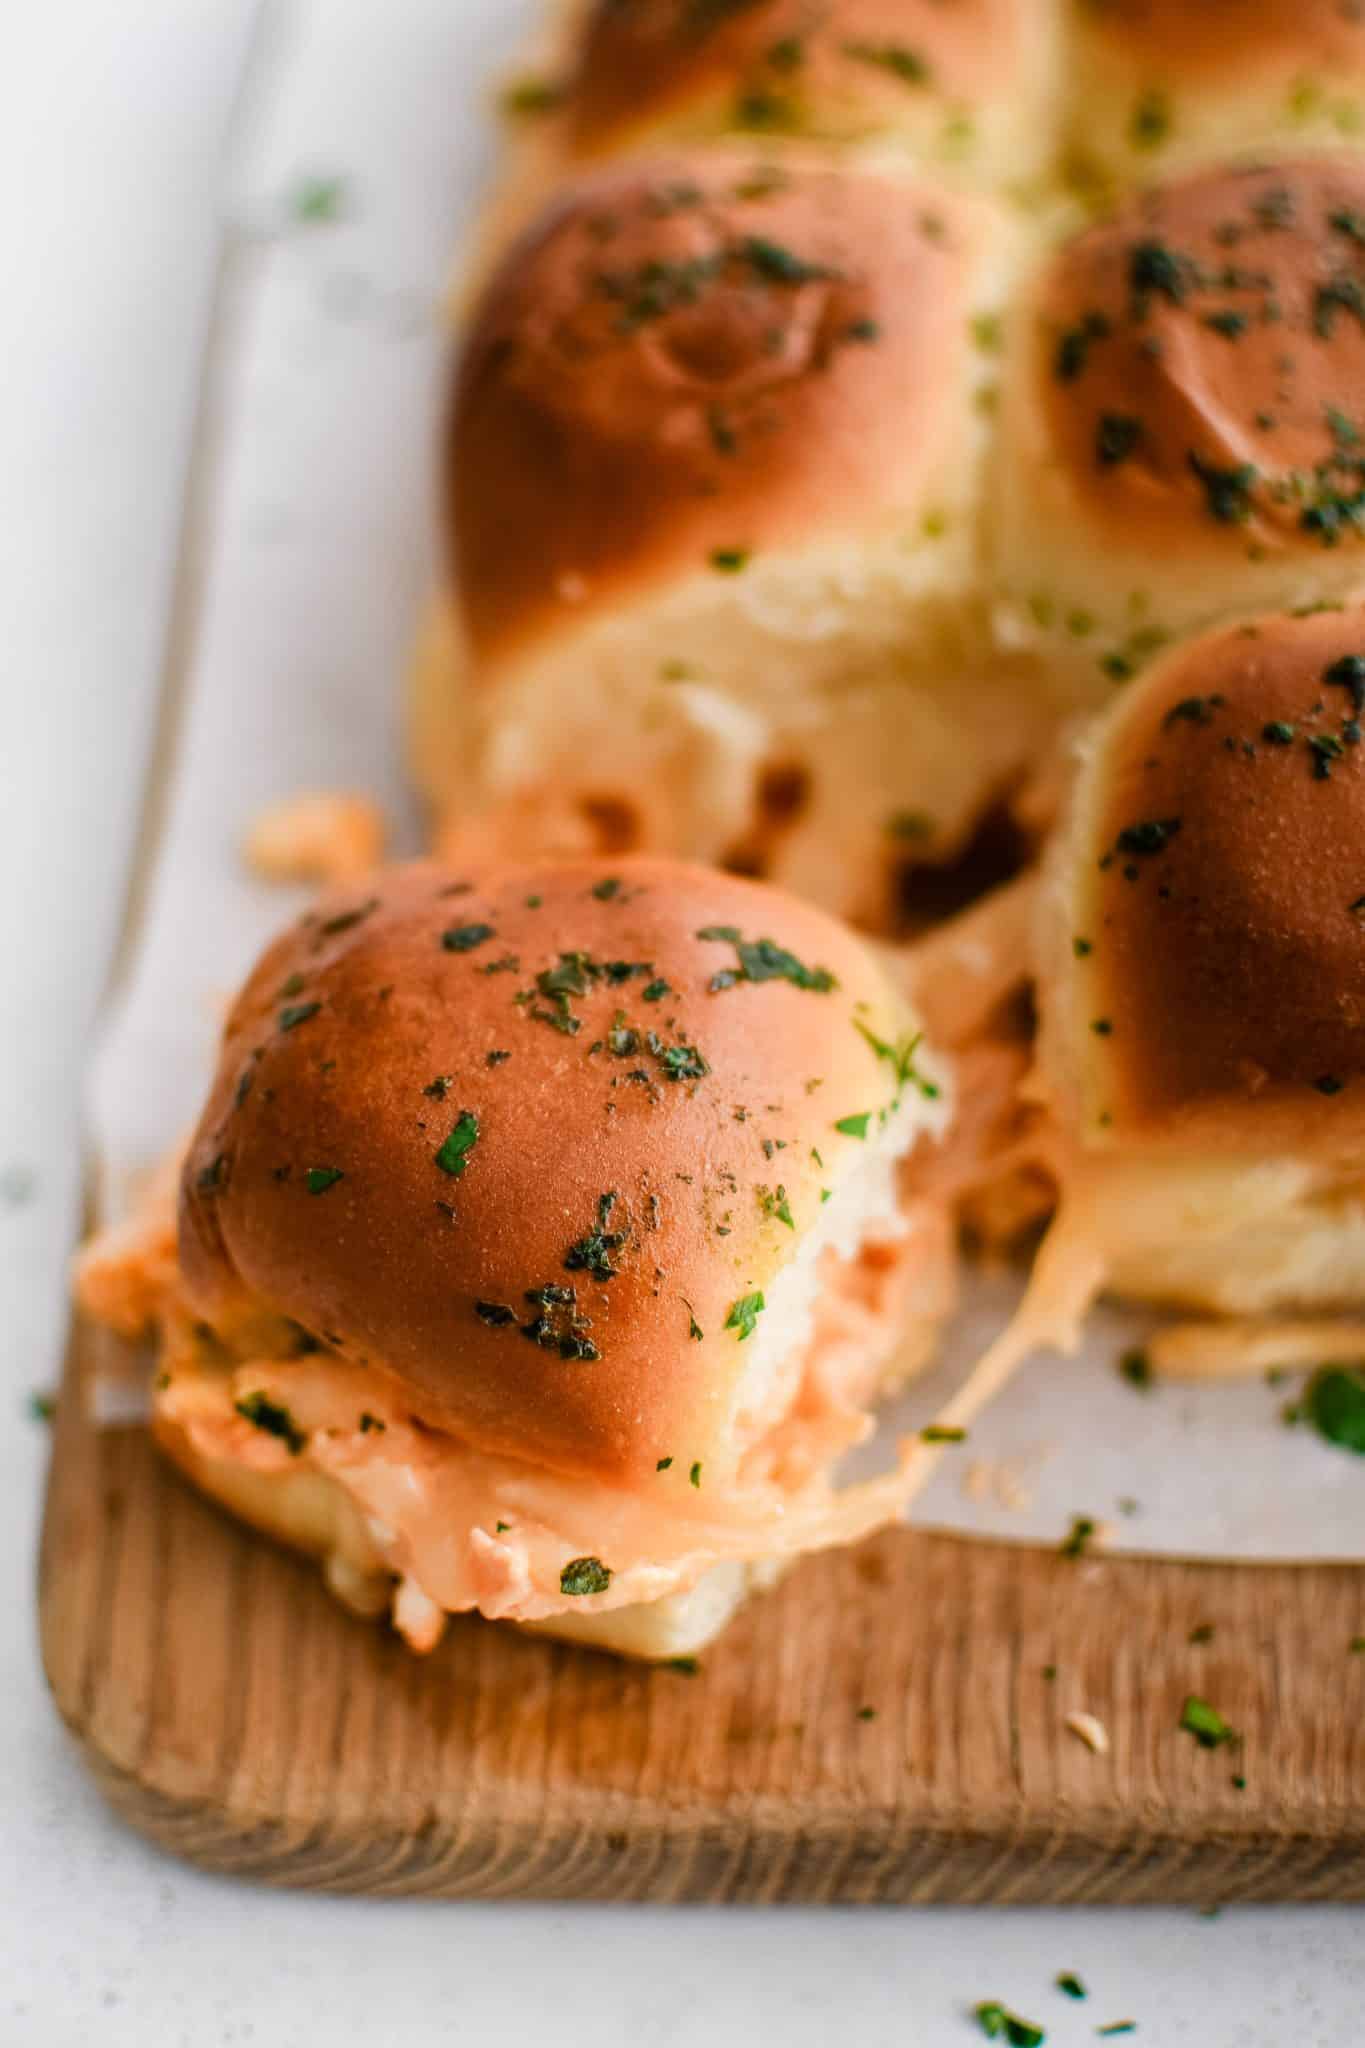 Golden cheesy buffalo chicken slider with herb infused butter brushed over the top bun.